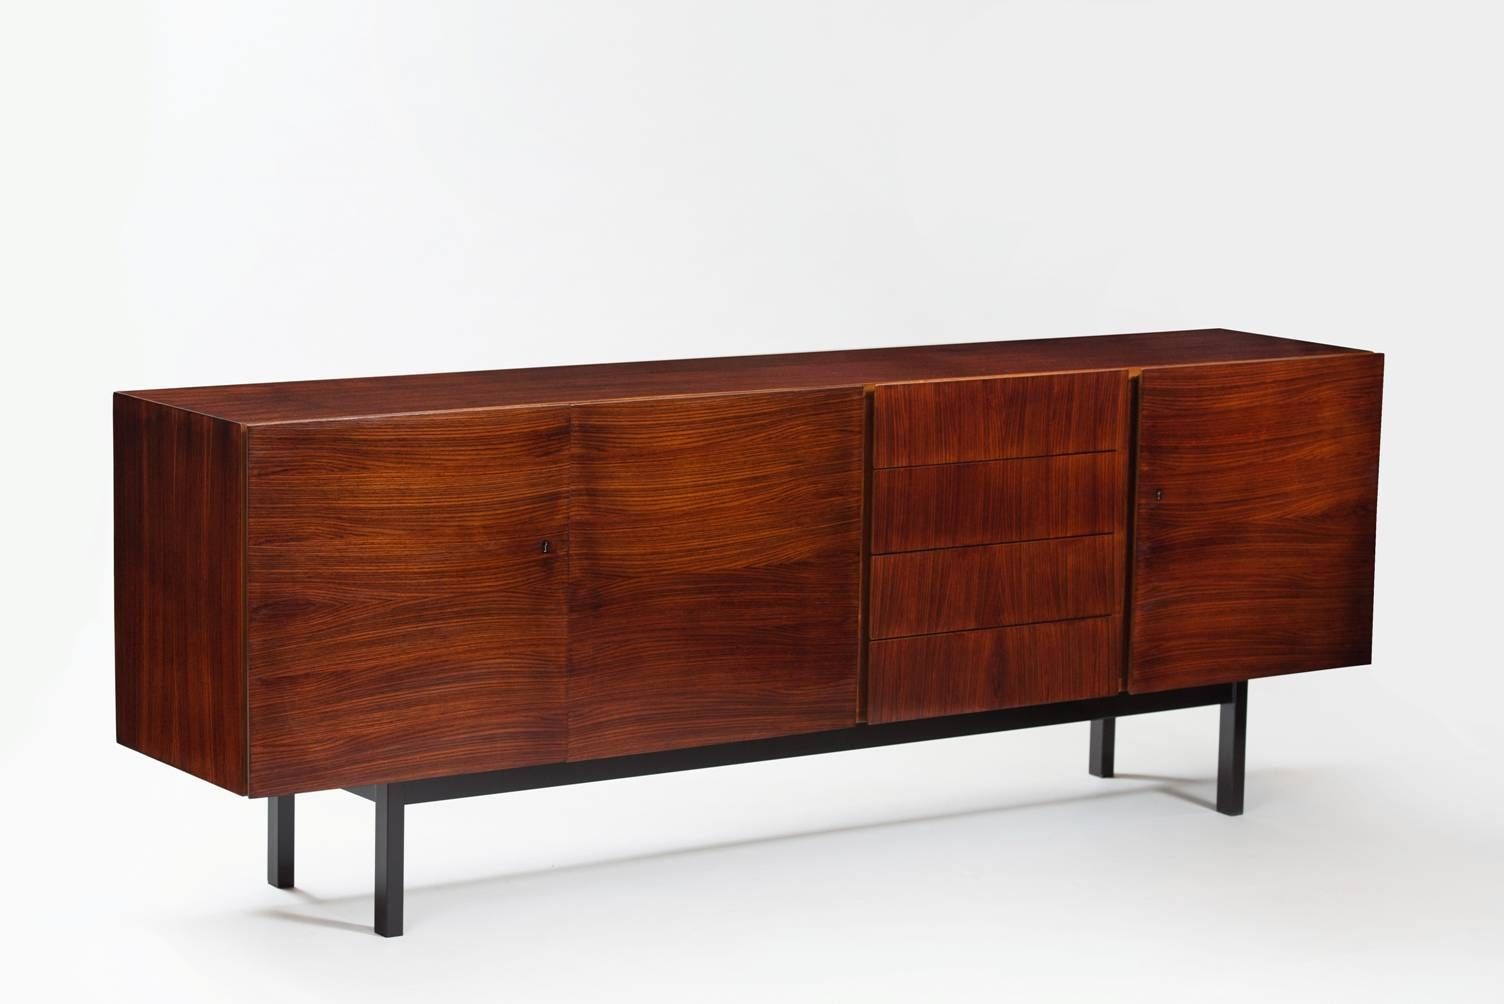 French Rosewood Sideboard With Metal Legs For Sale At Pamono Pertaining To Metal Sideboards (View 13 of 20)